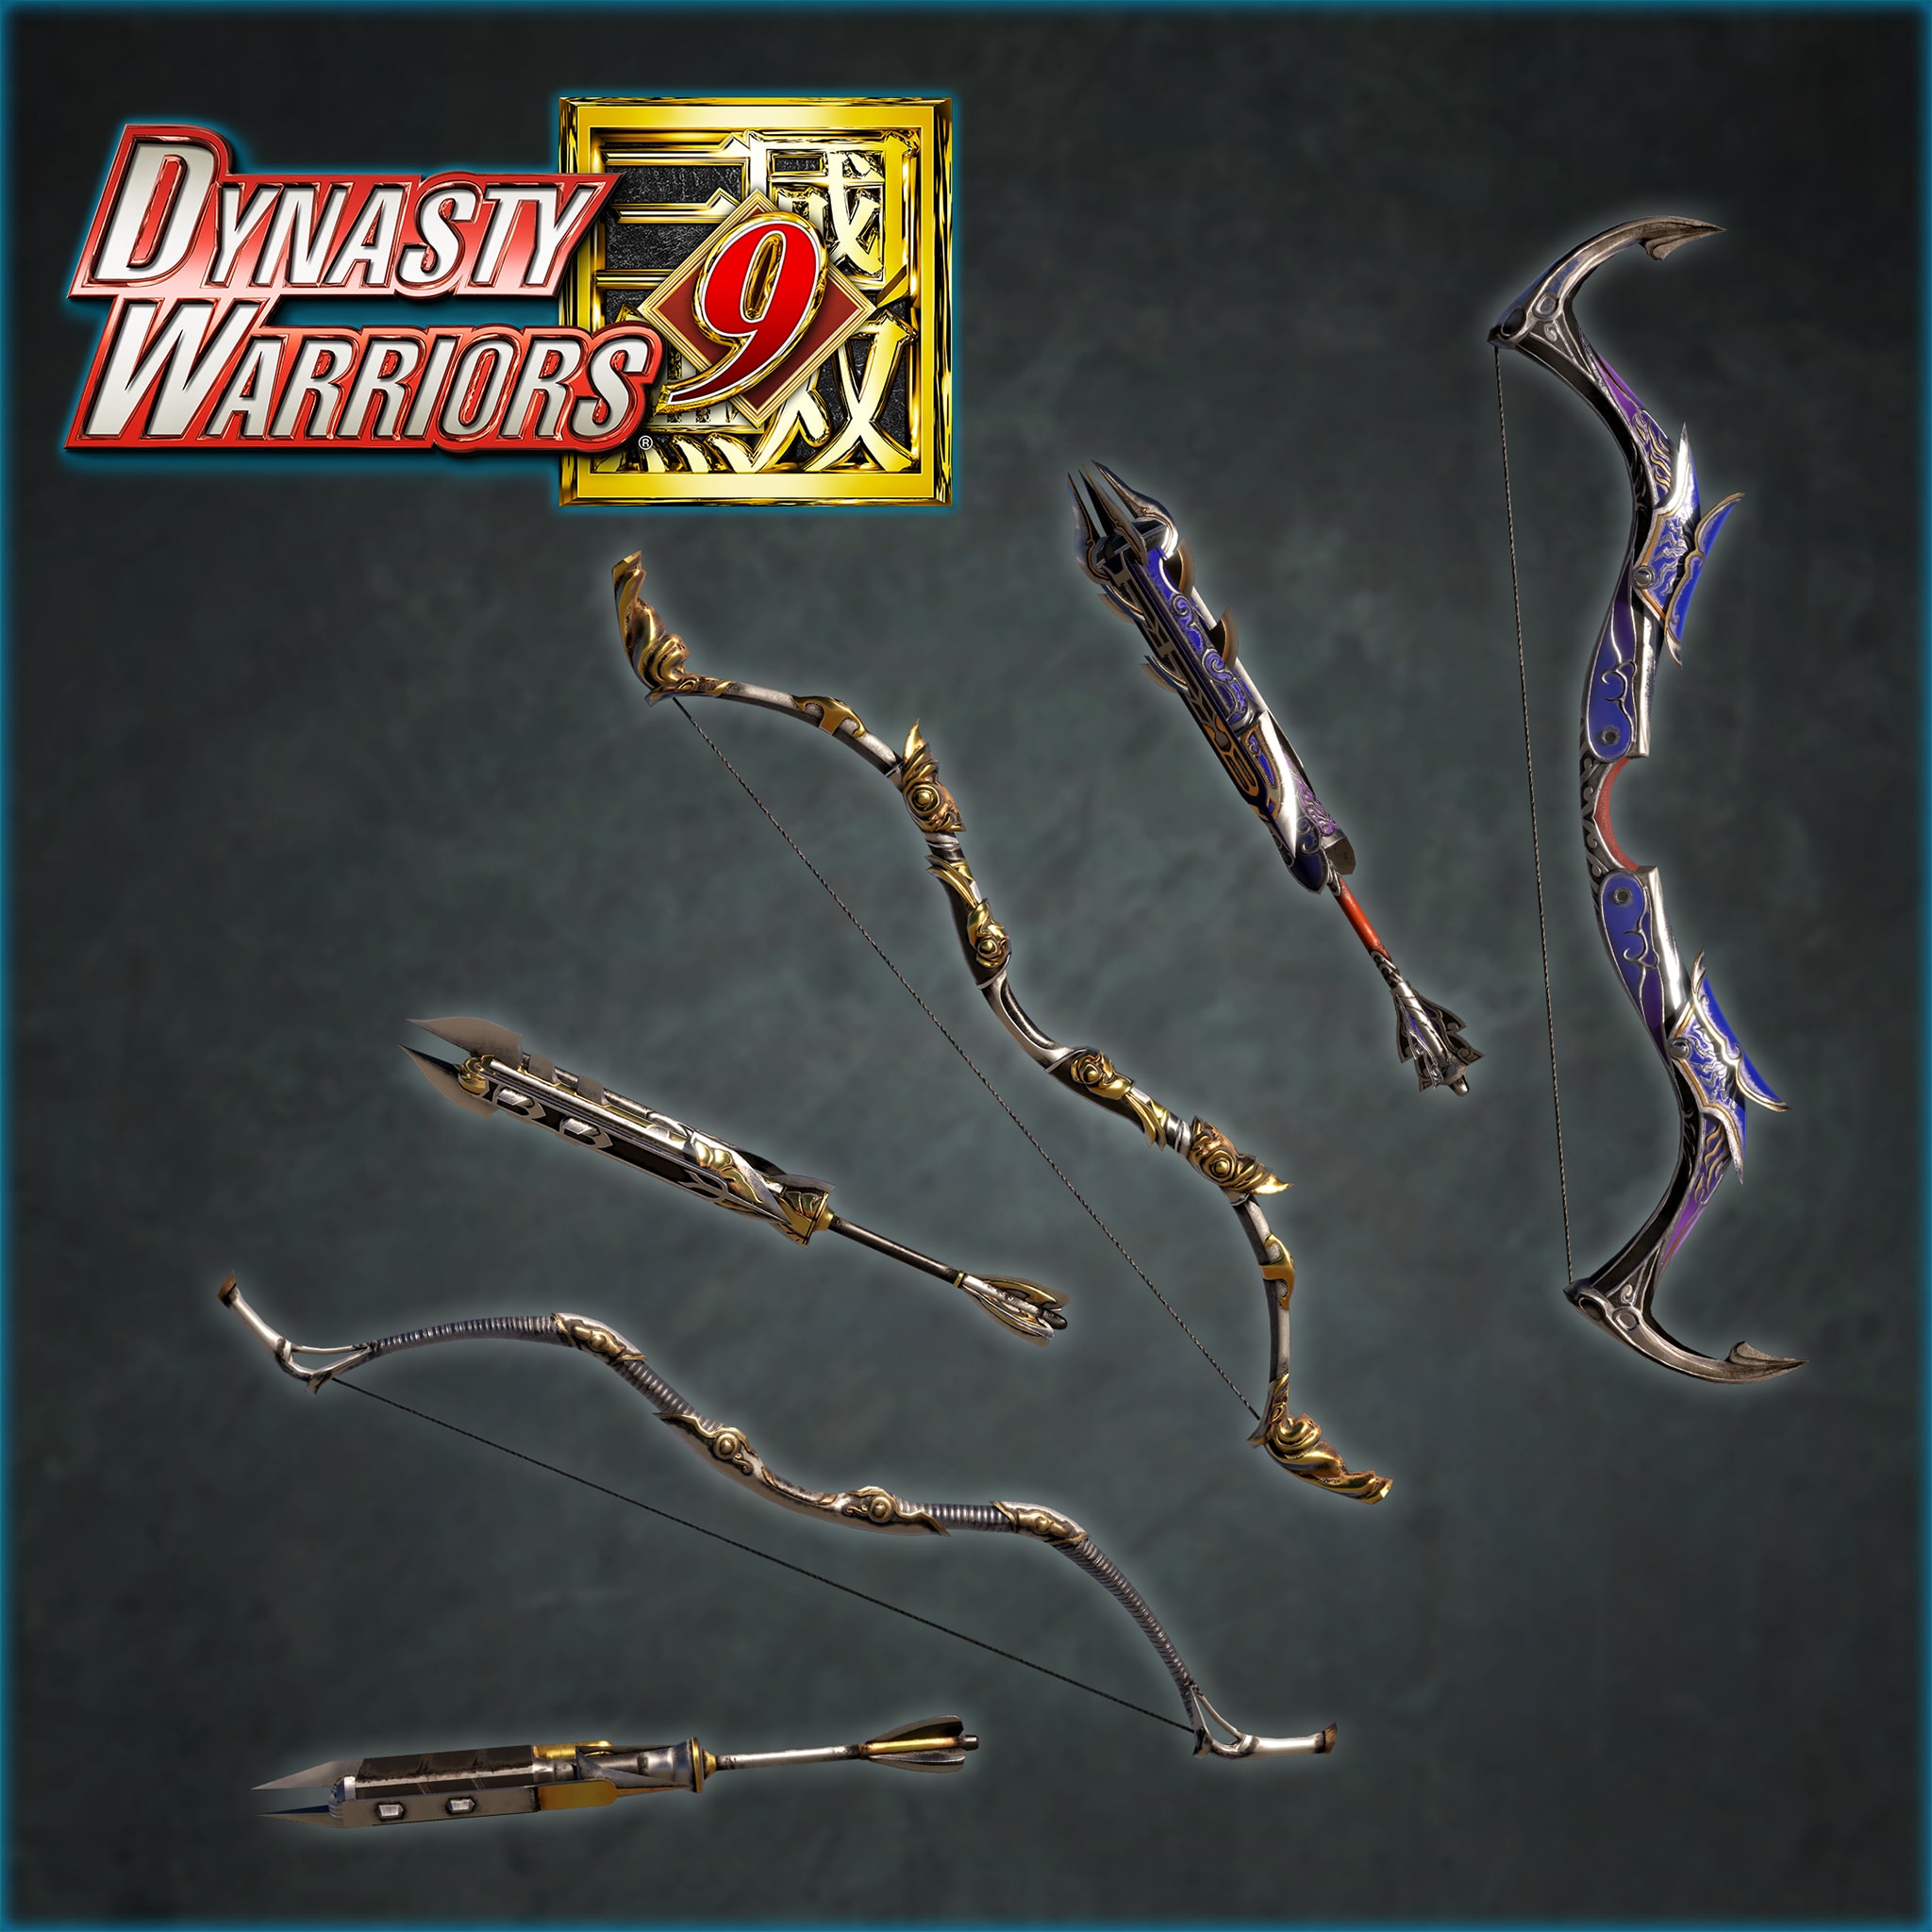 DYNASTY WARRIORS 9: Additional Weapon 'Bow & Rod'